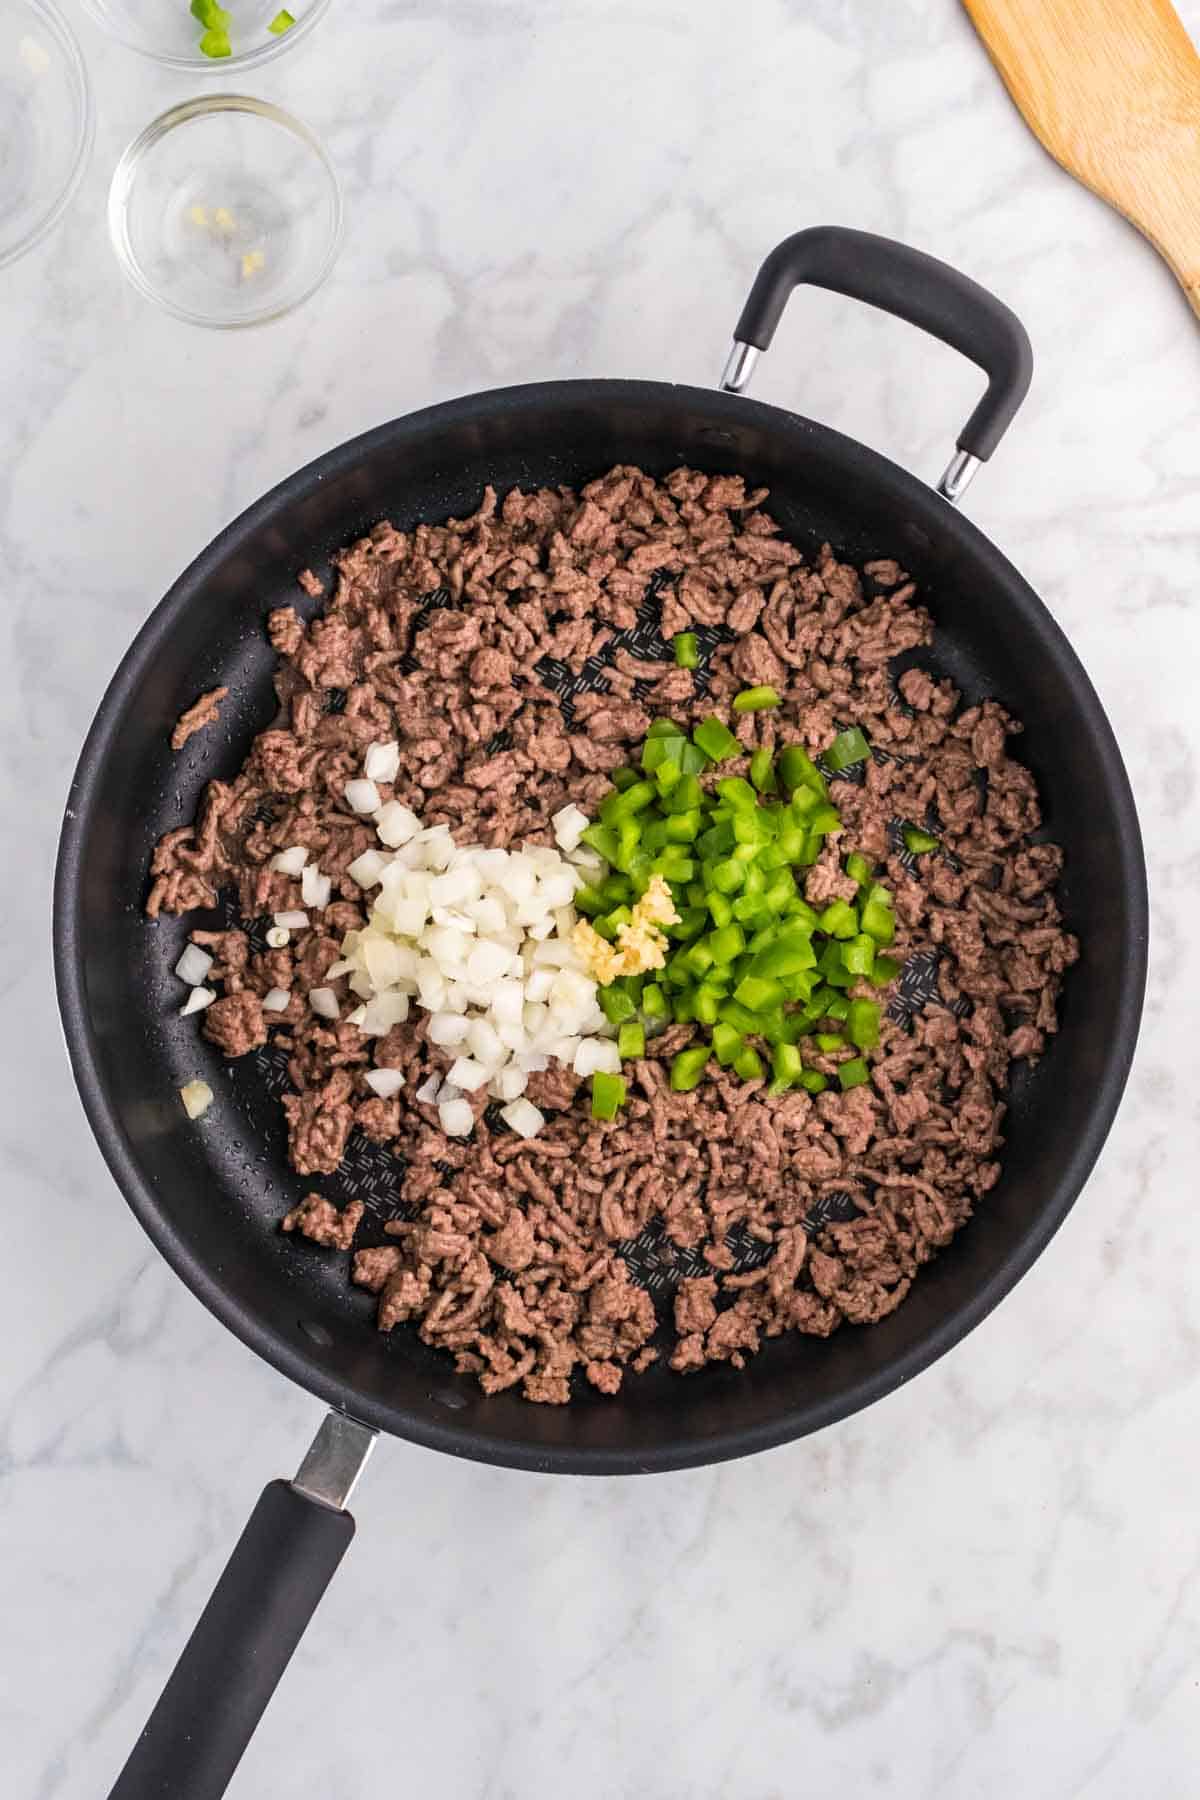 diced onion, minced garlic and diced green bell peppers on top of cooked ground beef in a skillet